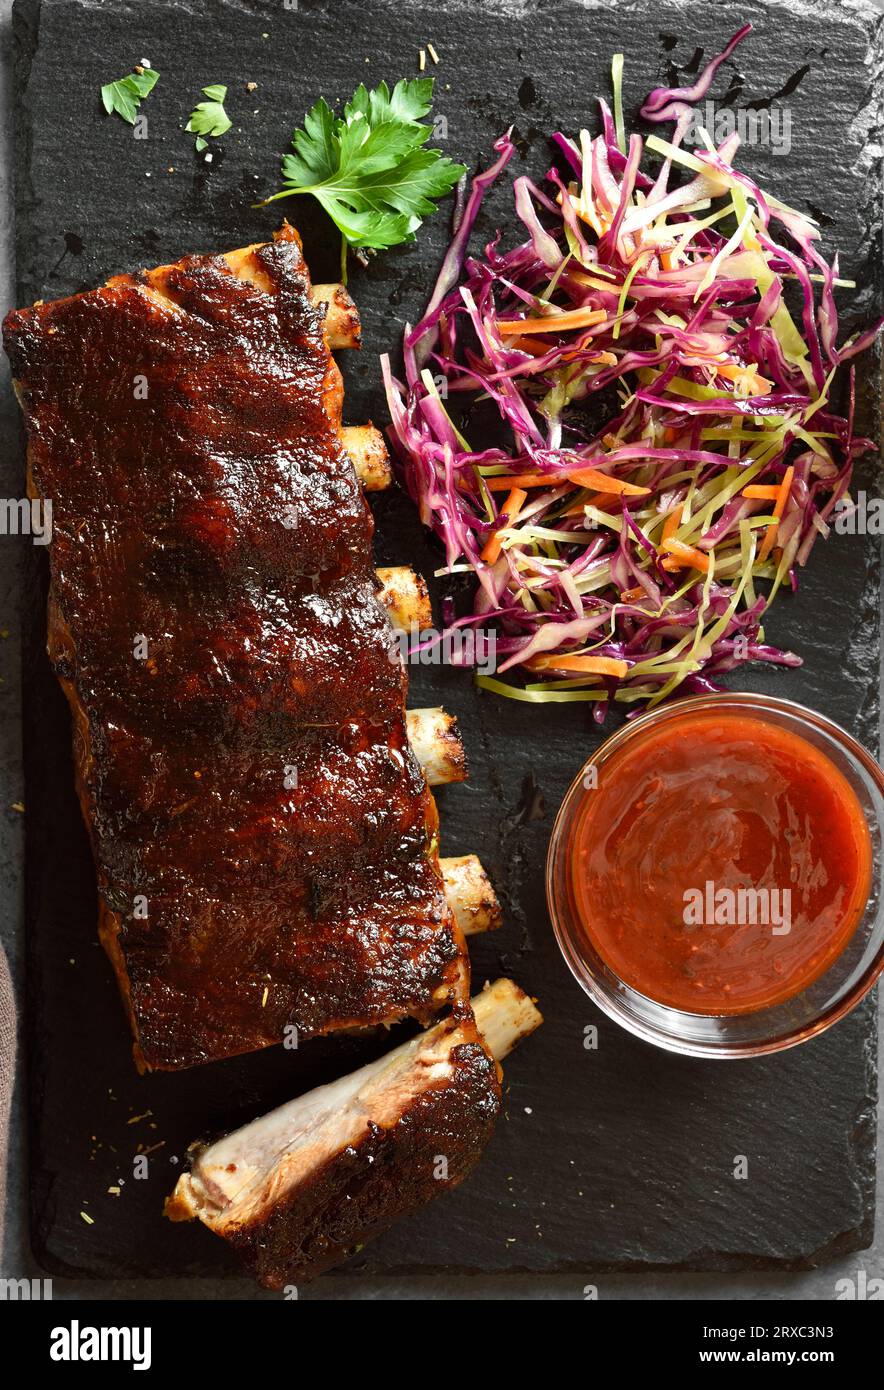 Spicy grilled spare ribs on board over dark stone background. Top view, flat lay Stock Photo